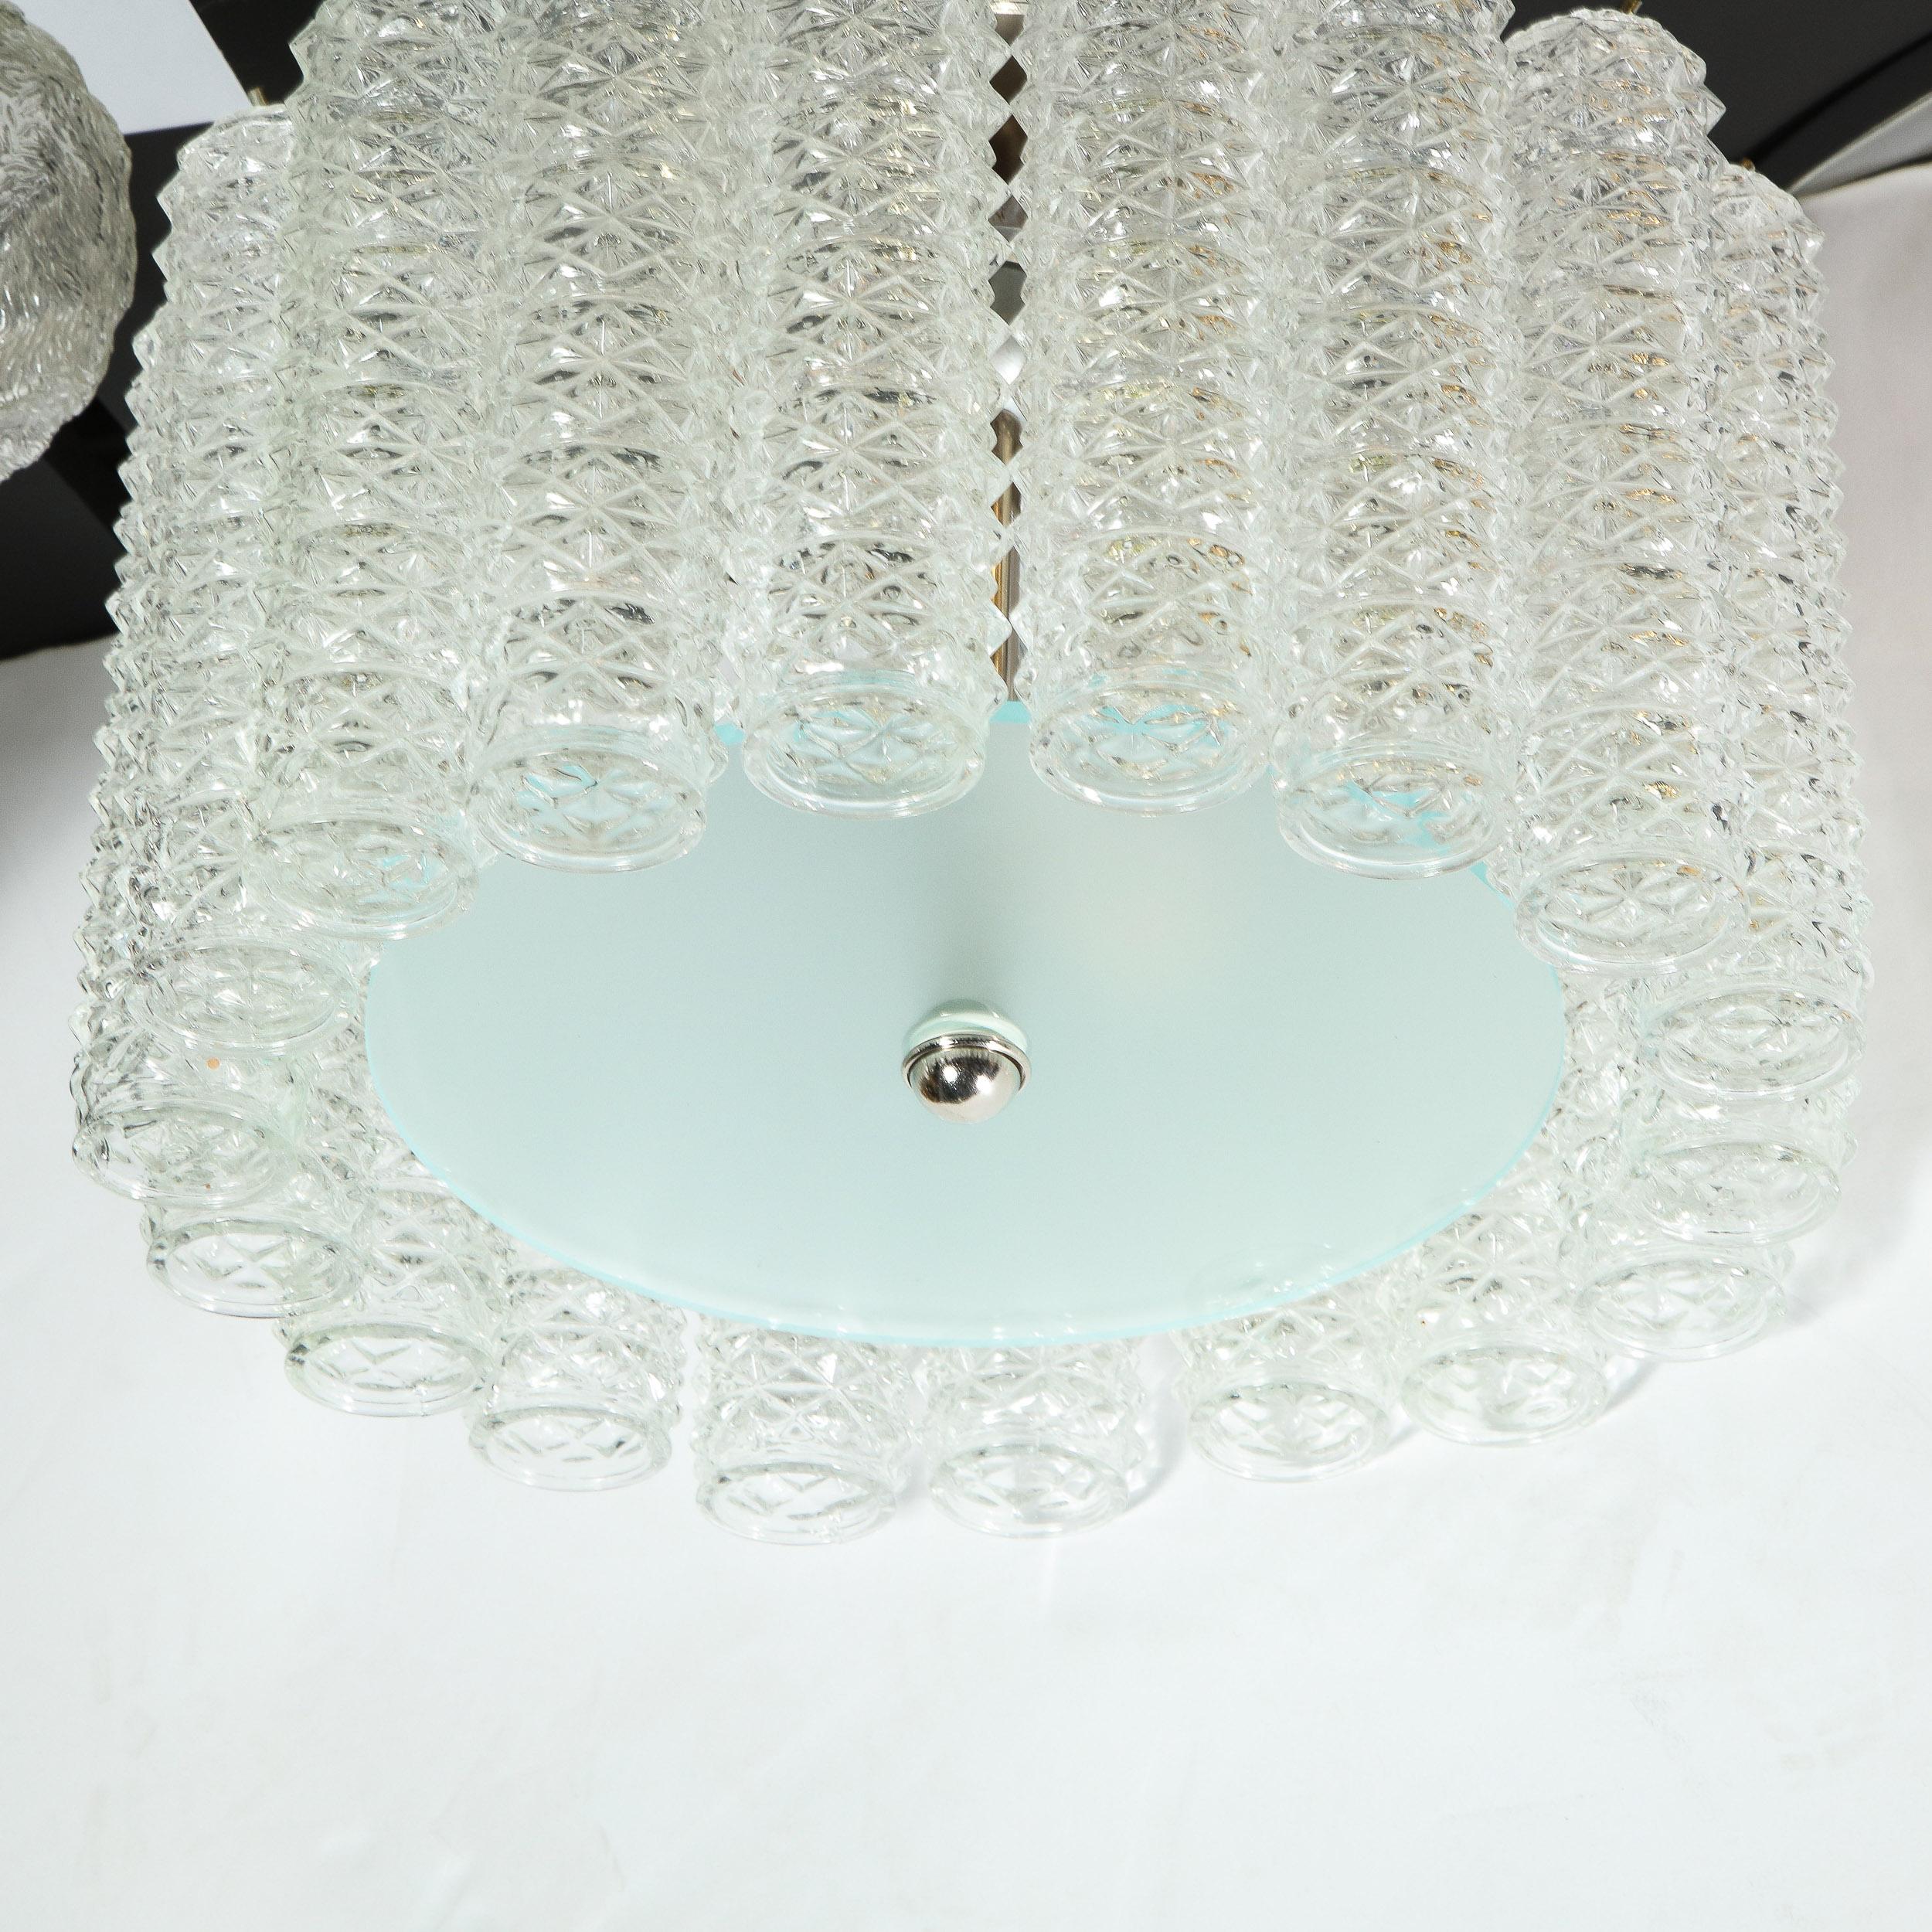 Midcentury Chrome, Hand Blown Translucent and Frosted Murano Glass Chandelier For Sale 1